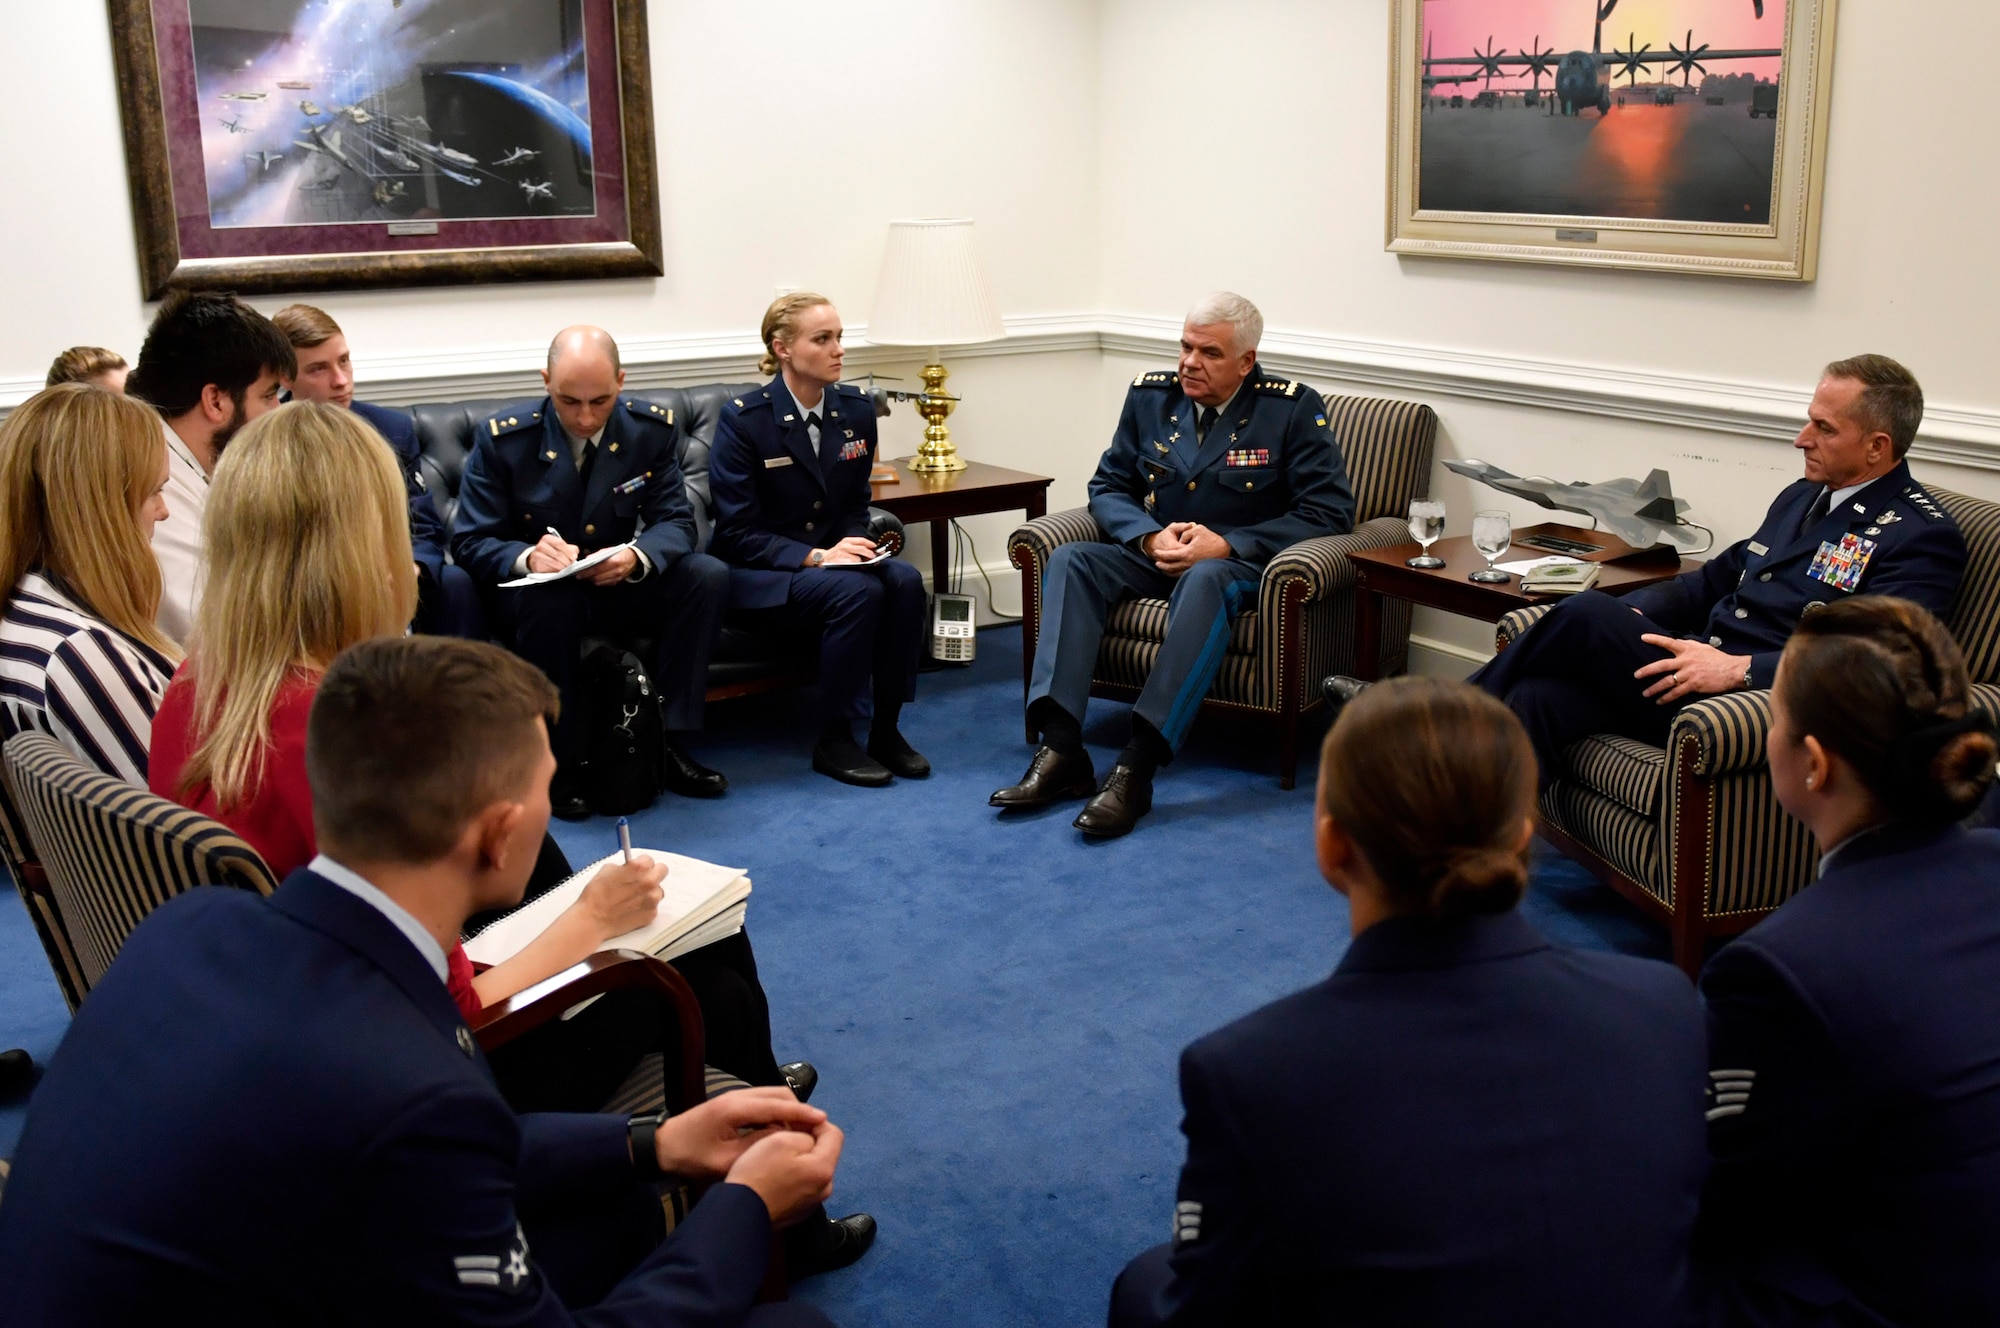 Air Force Chief of Staff Gen. David L. Goldfein and General-Colonel Sergii Drozdov, Commander of the Ukrainian air force, talk to members of the press during a press conference at the Pentagon, Arlington, Va.,  Nov. 8, 2018.  (U.S. Air Force photo by Wayne Clark)